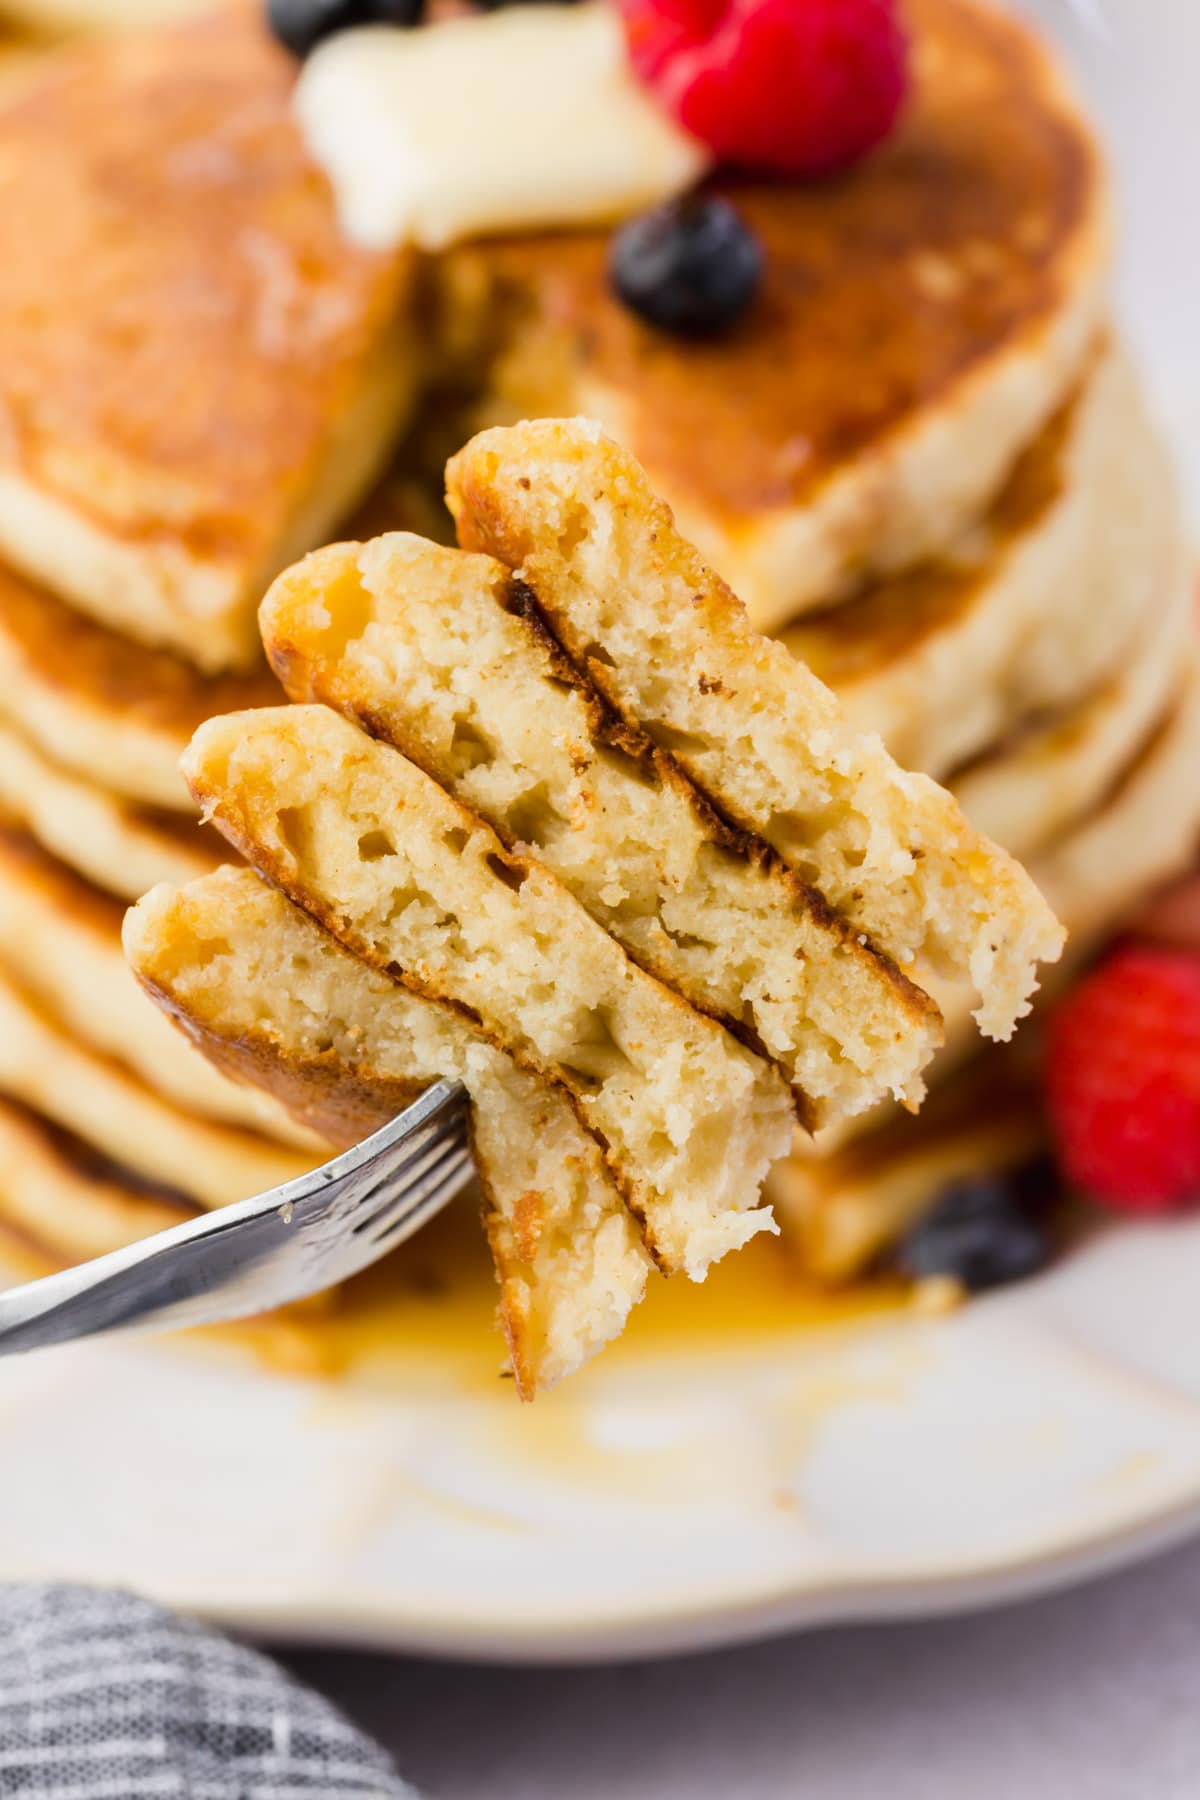 A forkful of gluten-free pancakes in front of a plate of a stack of gluten-free pancakes topped with butter, fresh berries, and maple syrup.